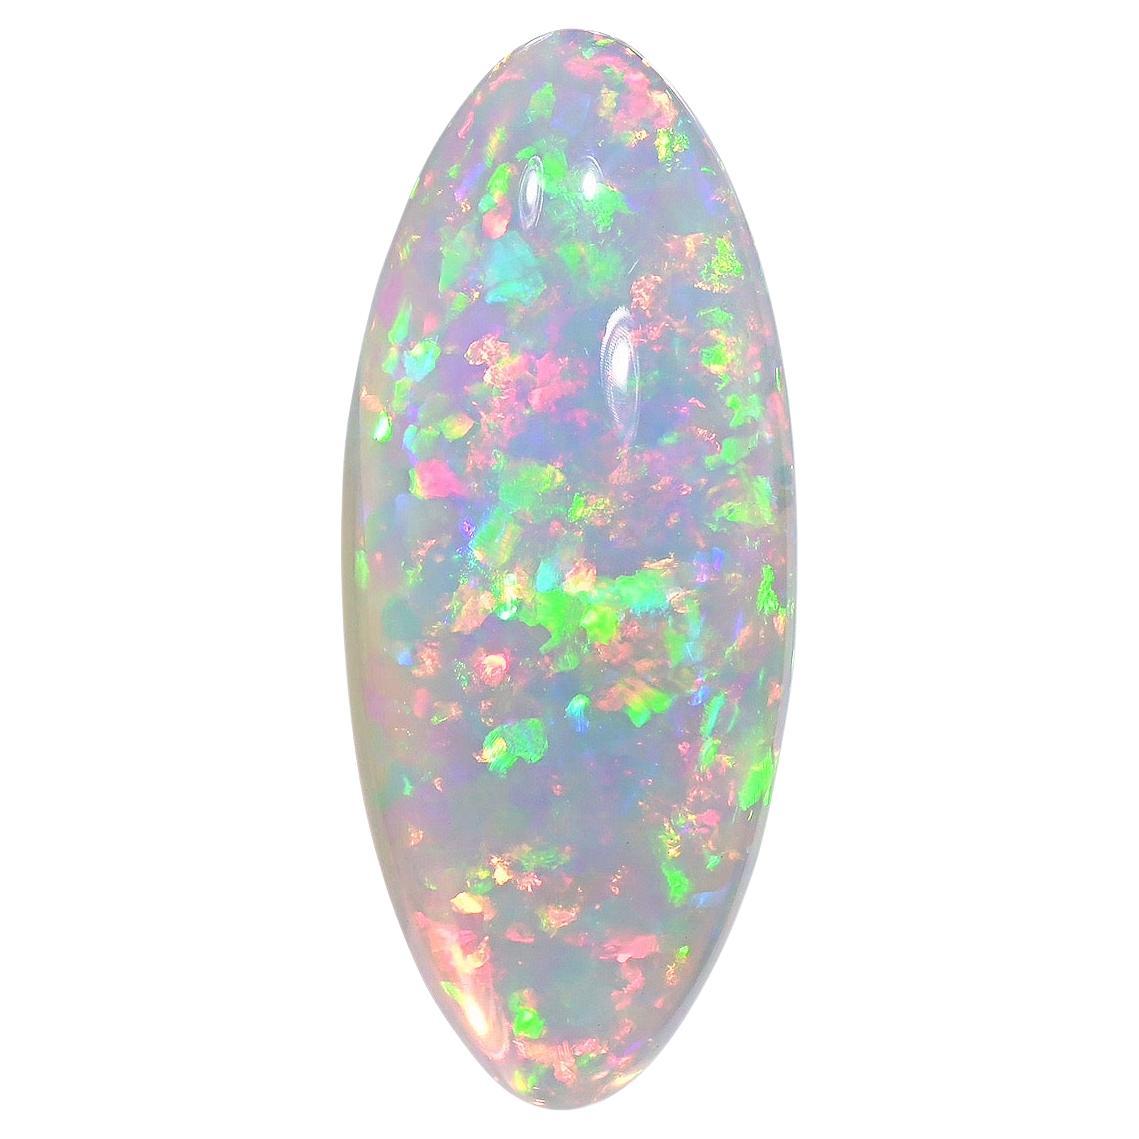 Opal Stone 38.92 Carat Natural Ethiopian Marquise loose Gemstone For Sale